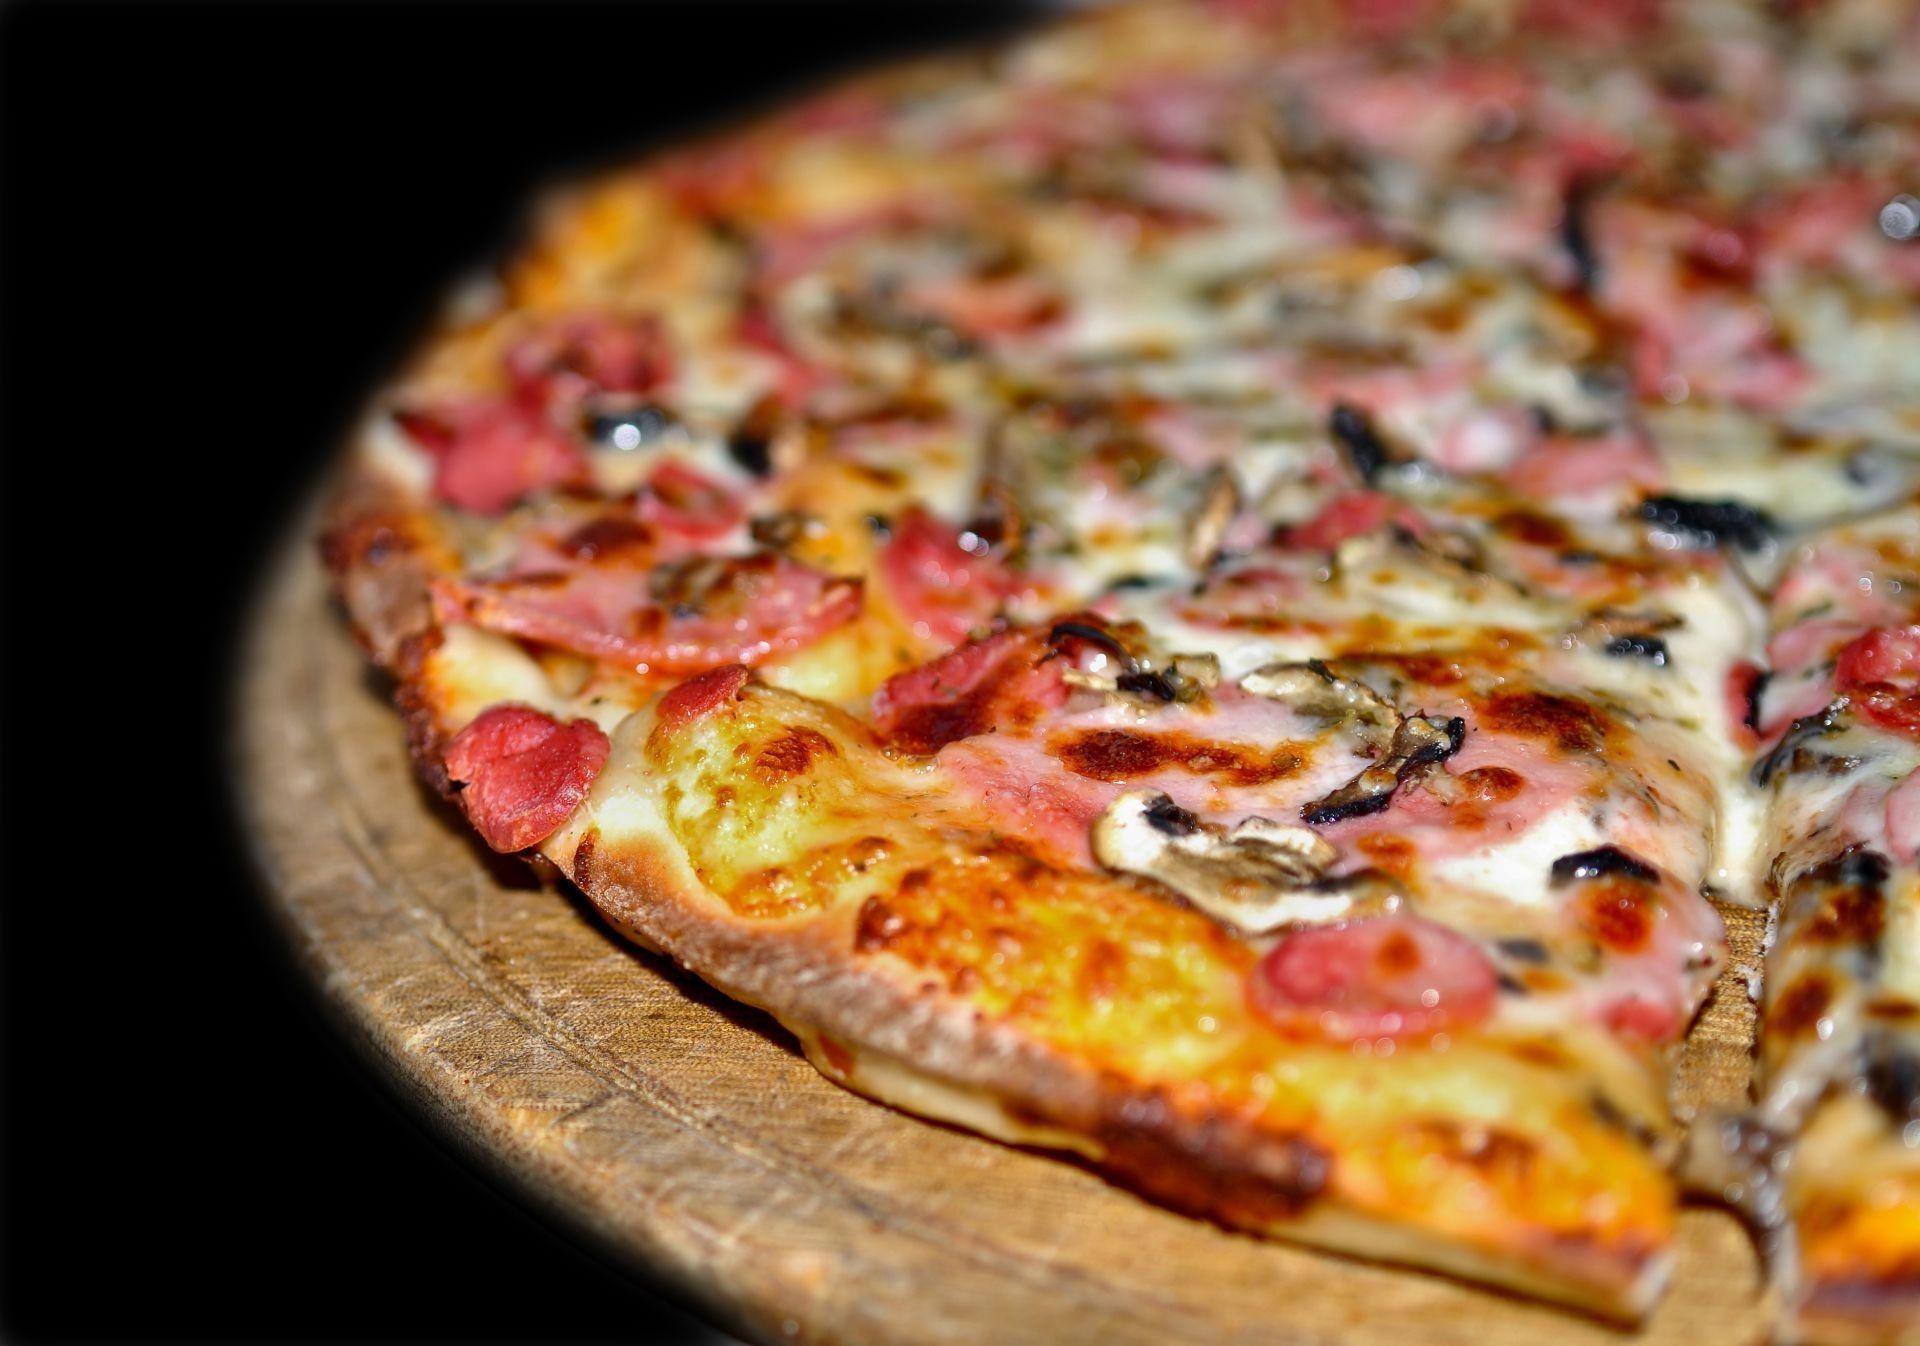 Macro tasty pizza the Food is satisfying food. Android wallpapers